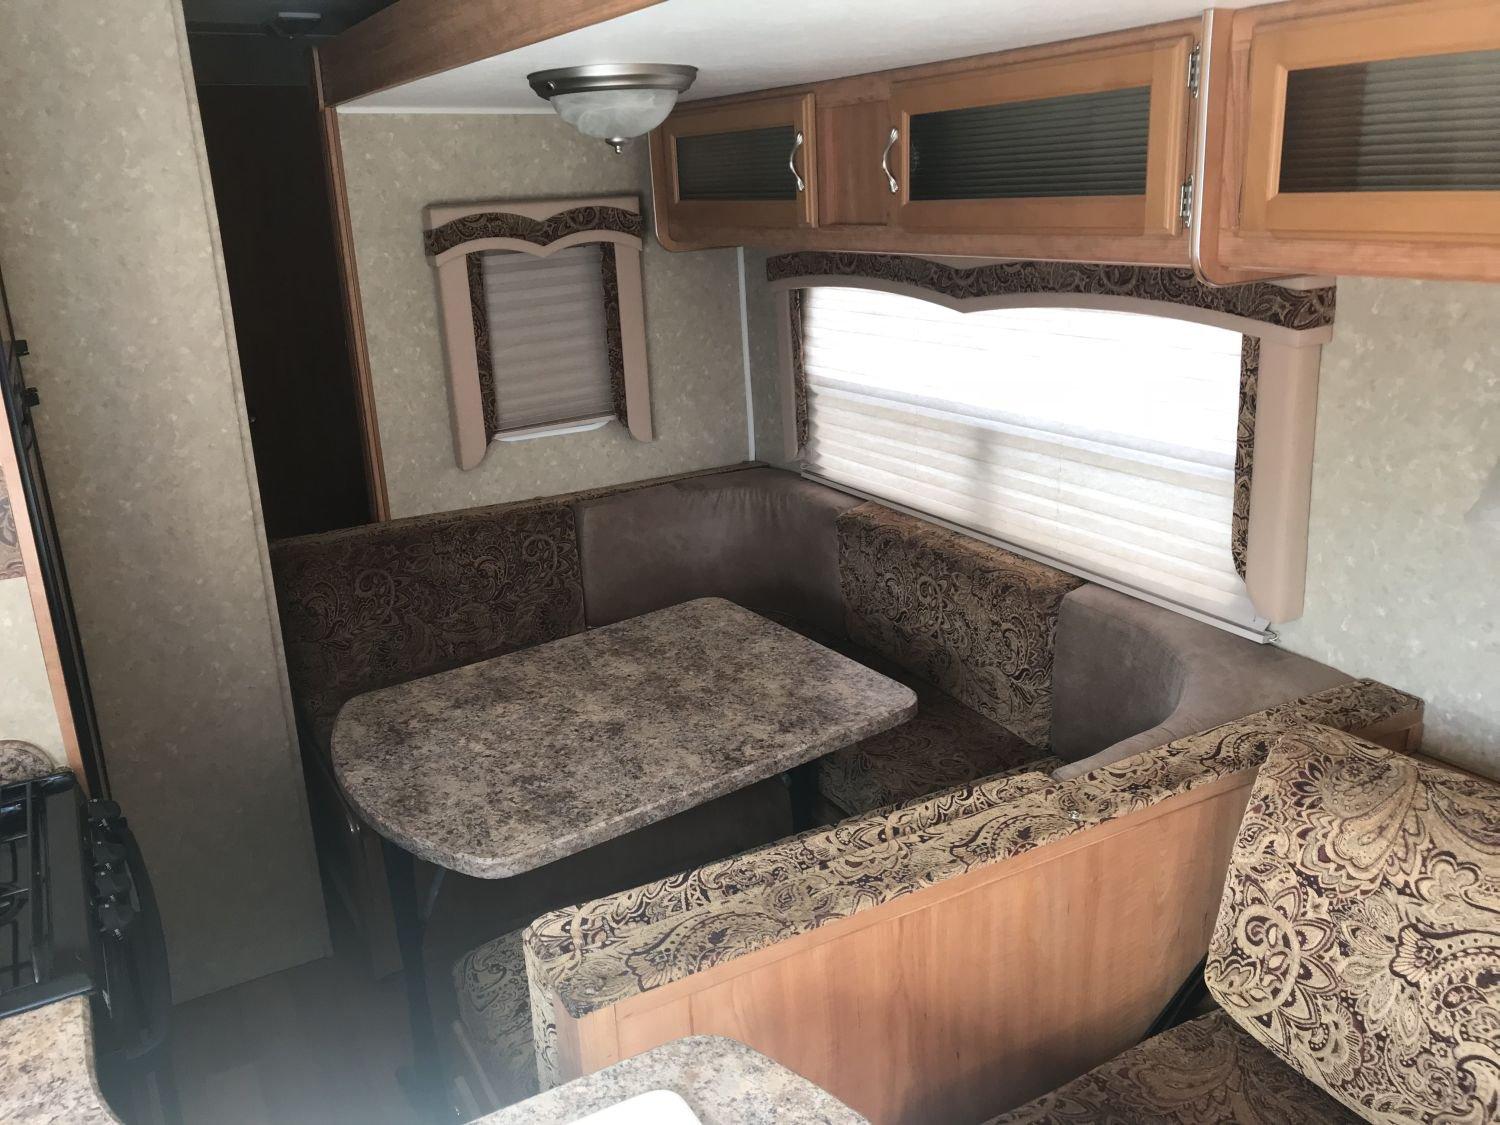 2009 Gulf Stream Conquest 32TBR tandem axle 35'8" camper with 2 slides (living room and back bedroom